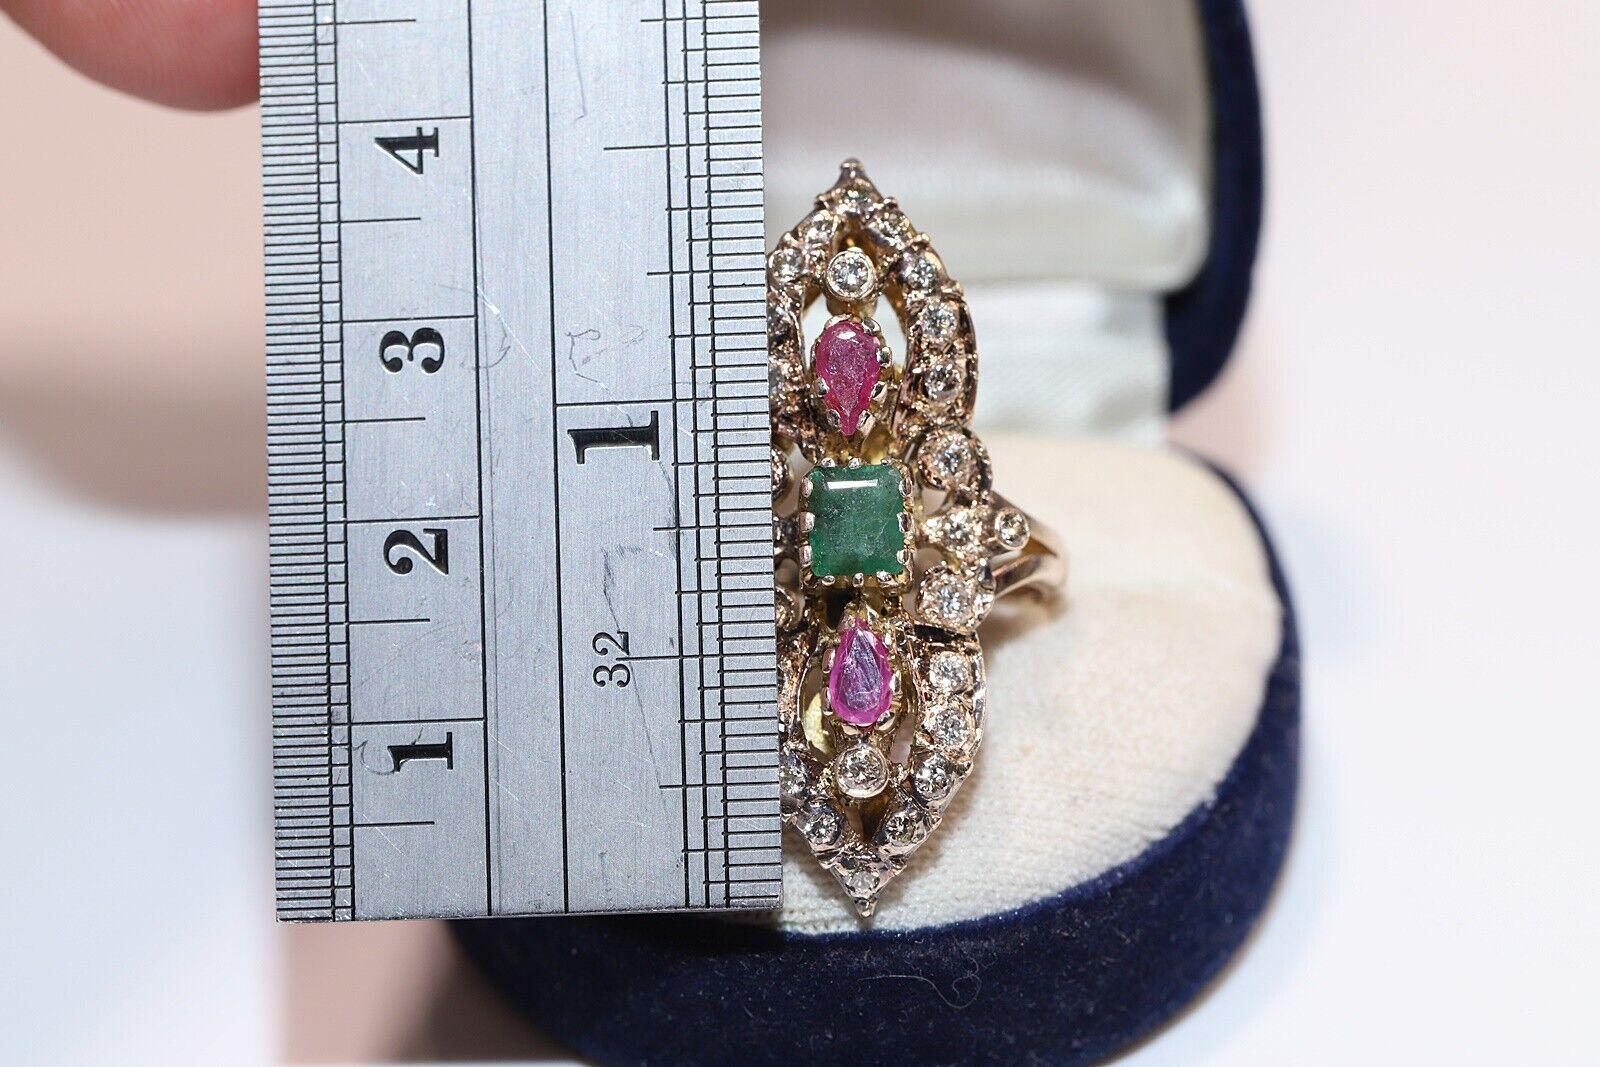 In very good condition.
Total weight is 9.3 grams.
Totally is diamond 0.70 carat.
Totally is emerald 0.80 carat.
Totally is ruby 0.50 carat.
The diamond is has H-I color and vs-s1.
Ring size is US 8.8 (We offer free resizing)
Acid tested to be 10k